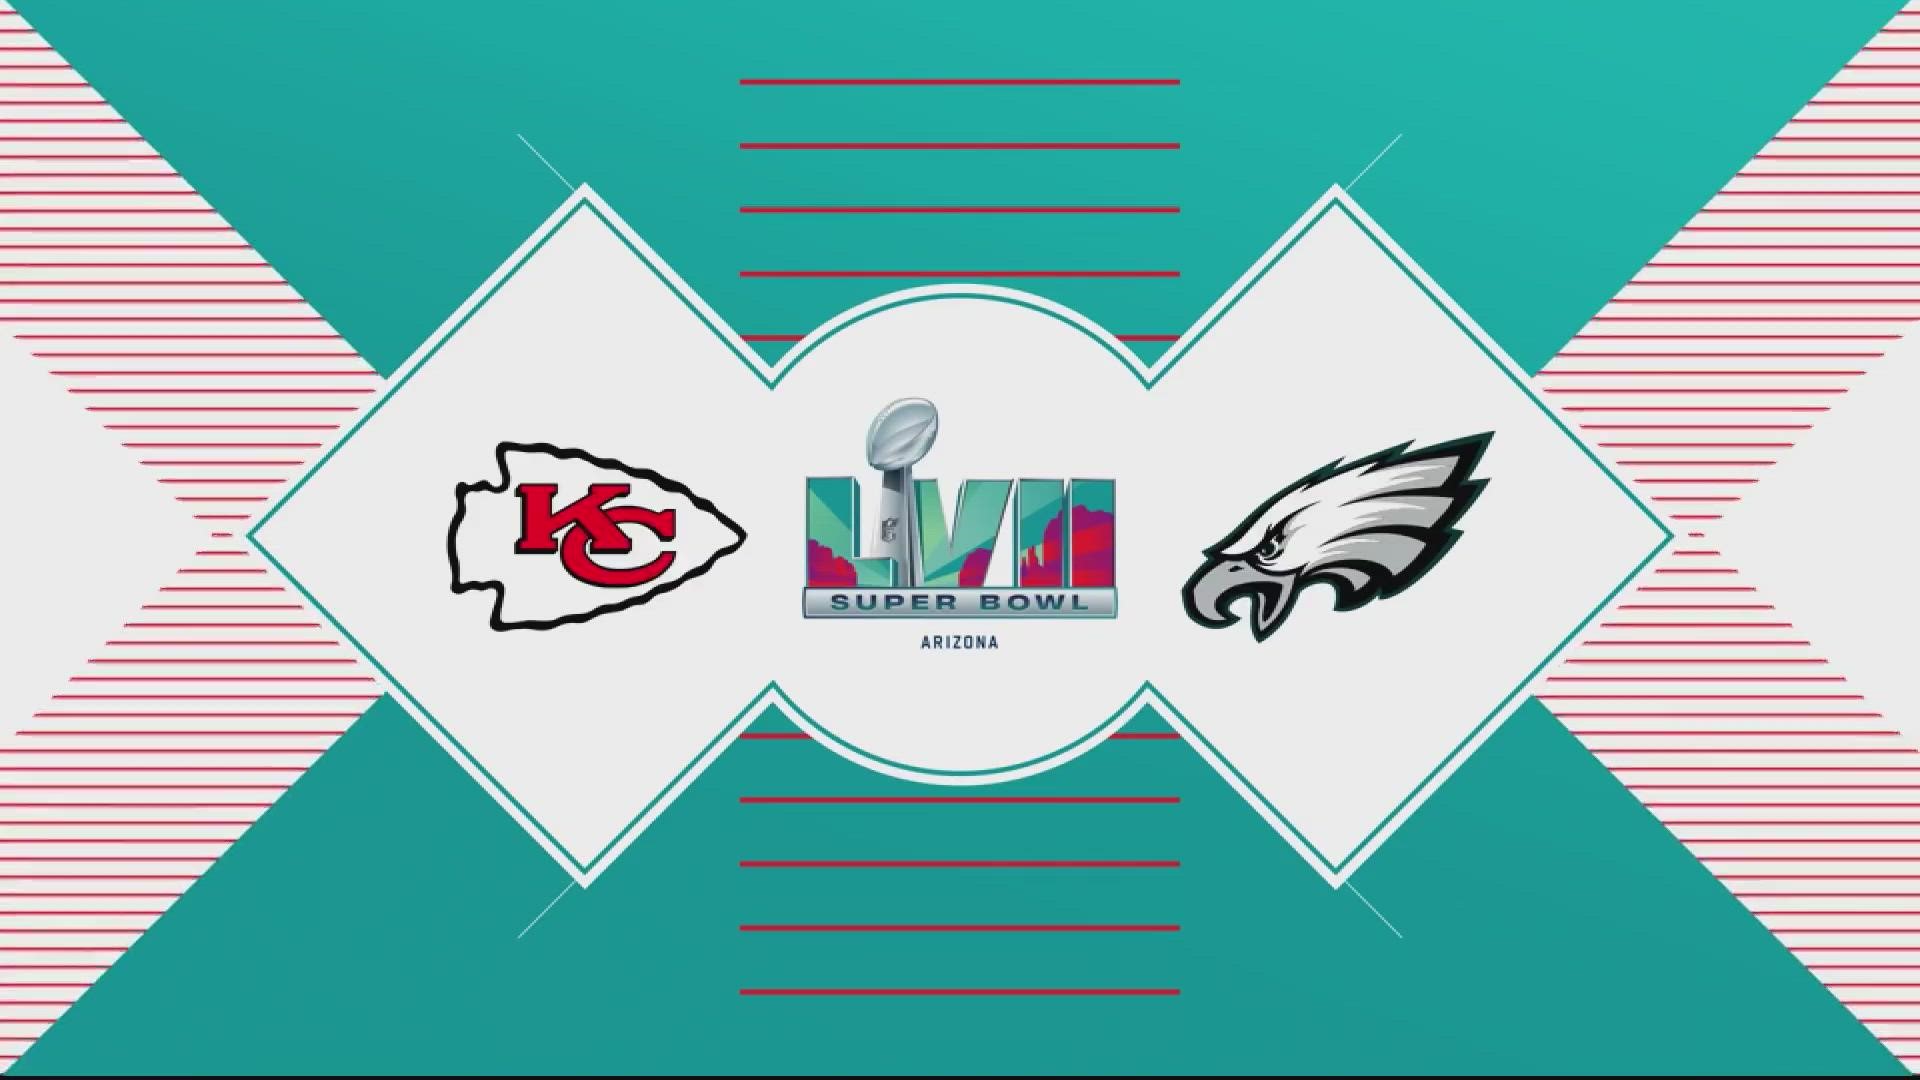 Top 5 Superbowl matchup stories, Eagles vs. Chiefs